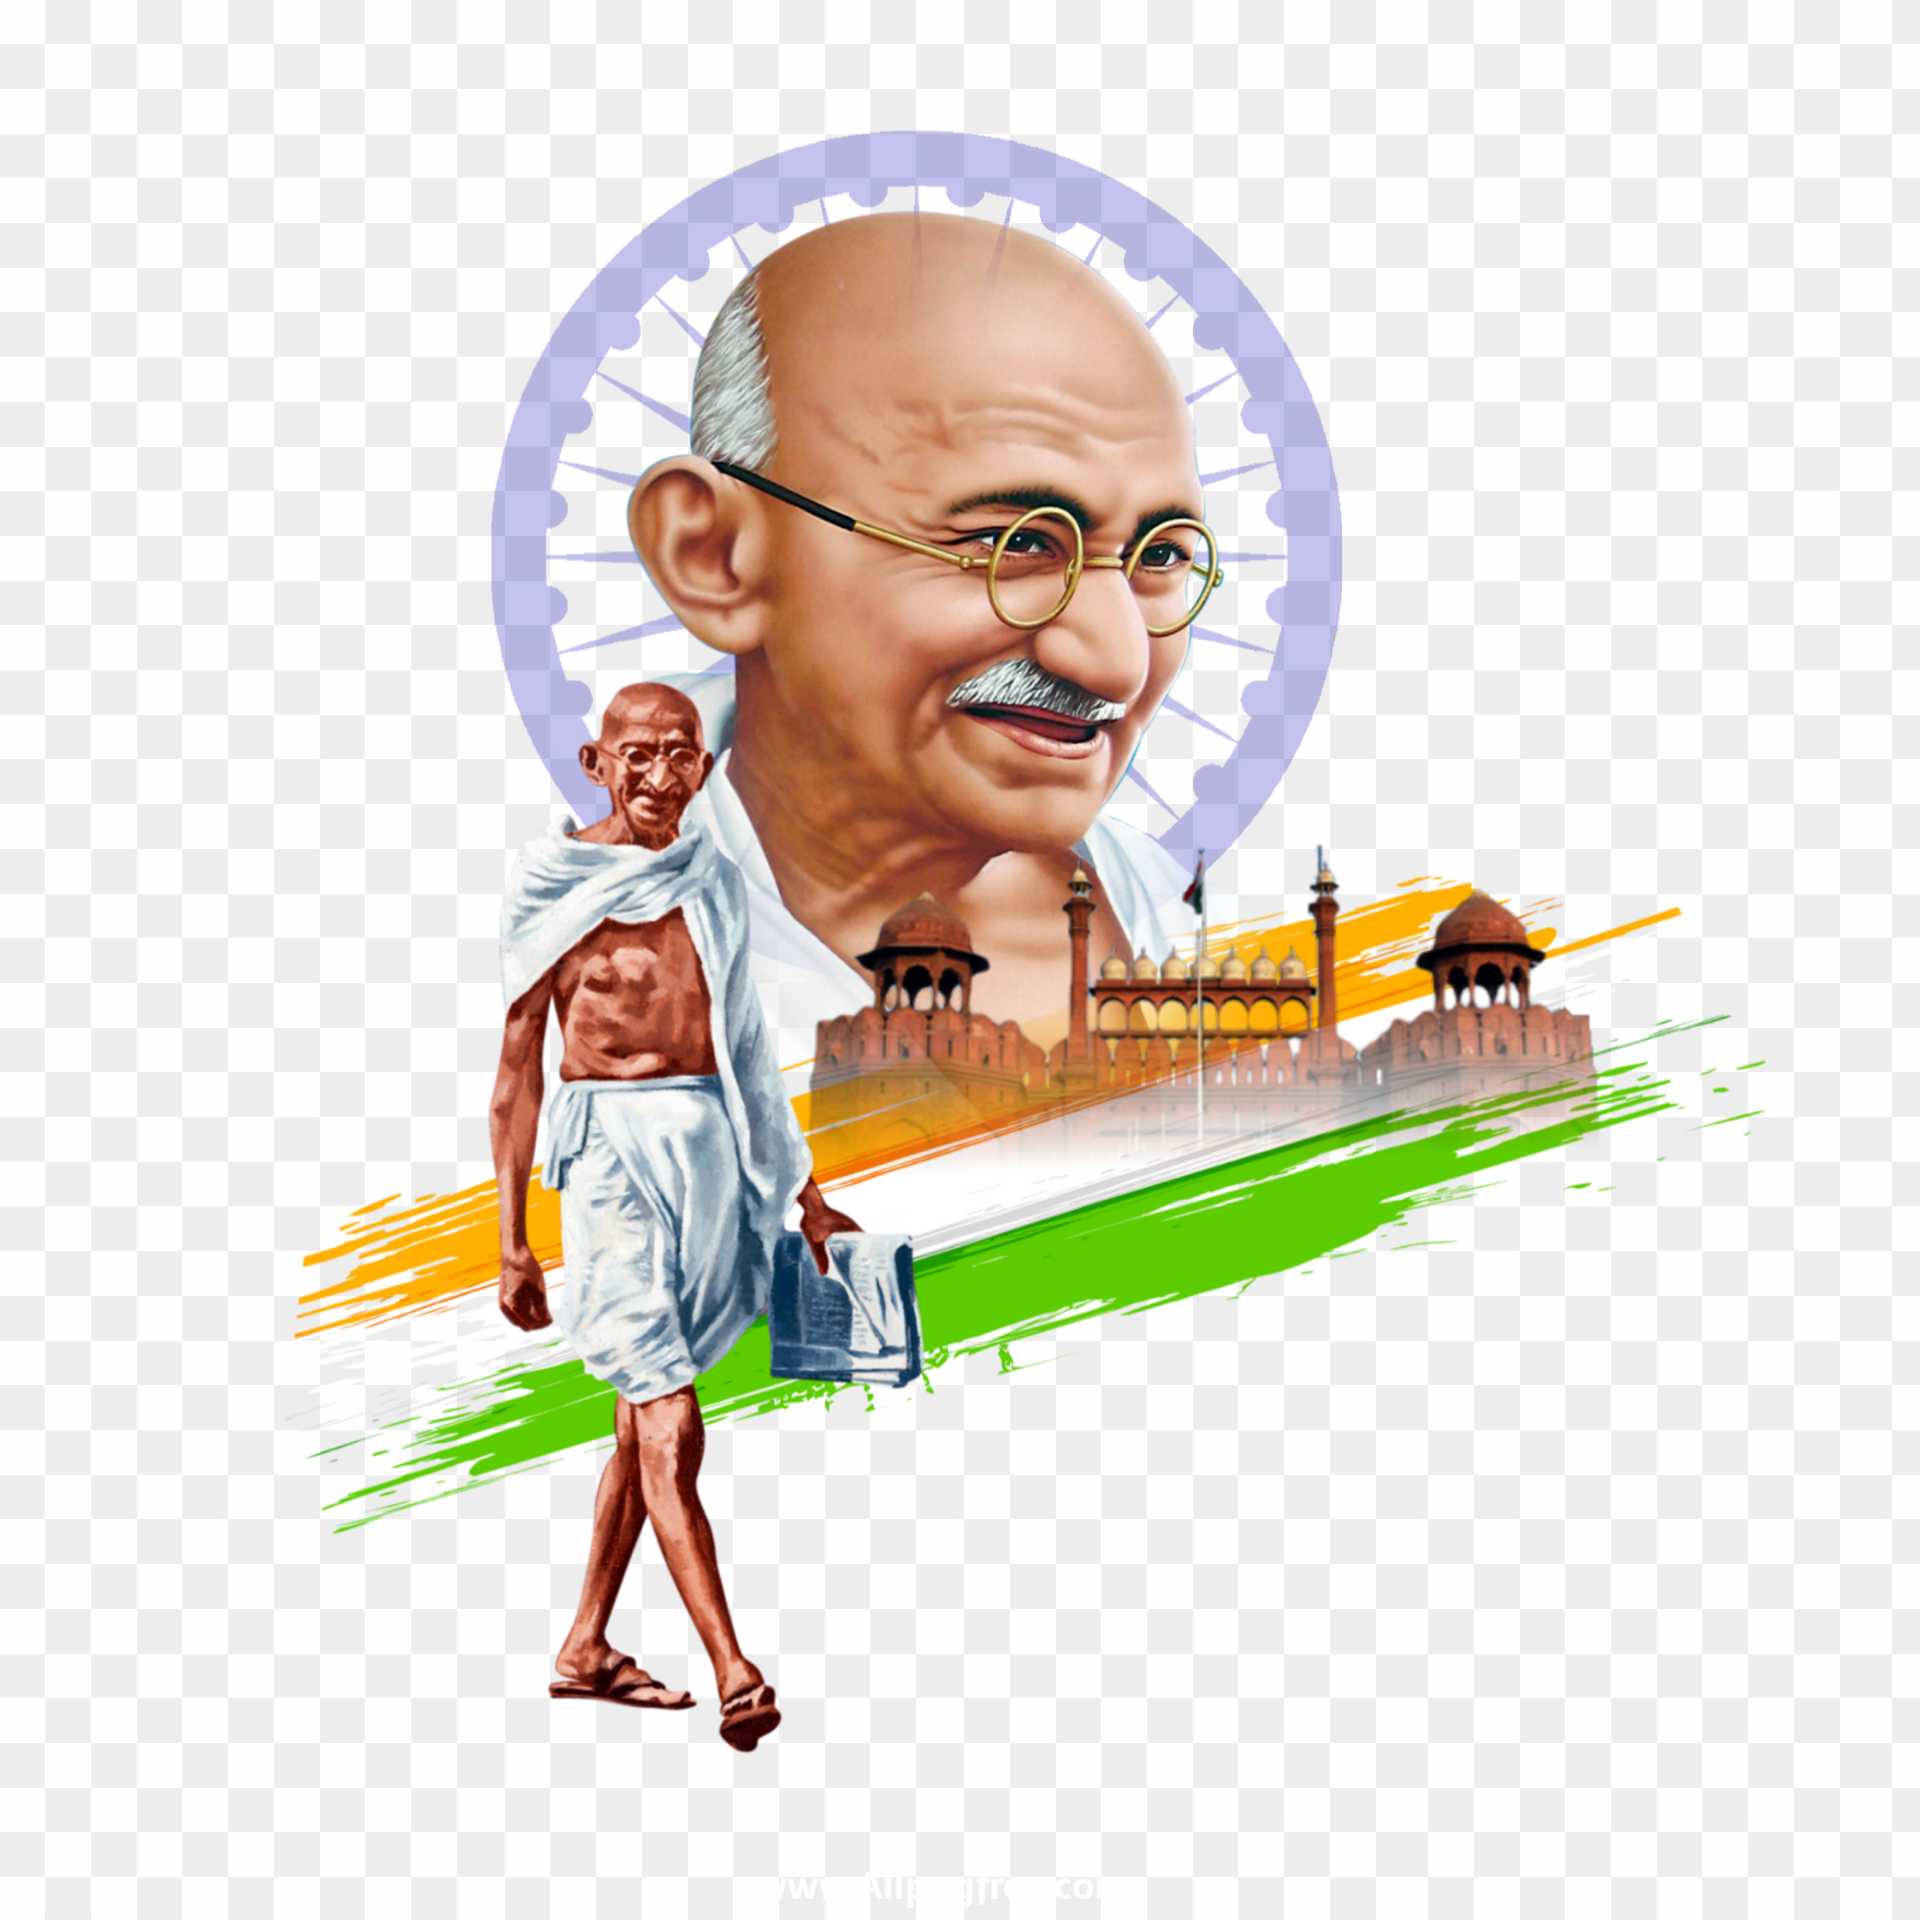 Mahatma Gandhi G | Draw on photos, Pencil sketch images, Poster drawing